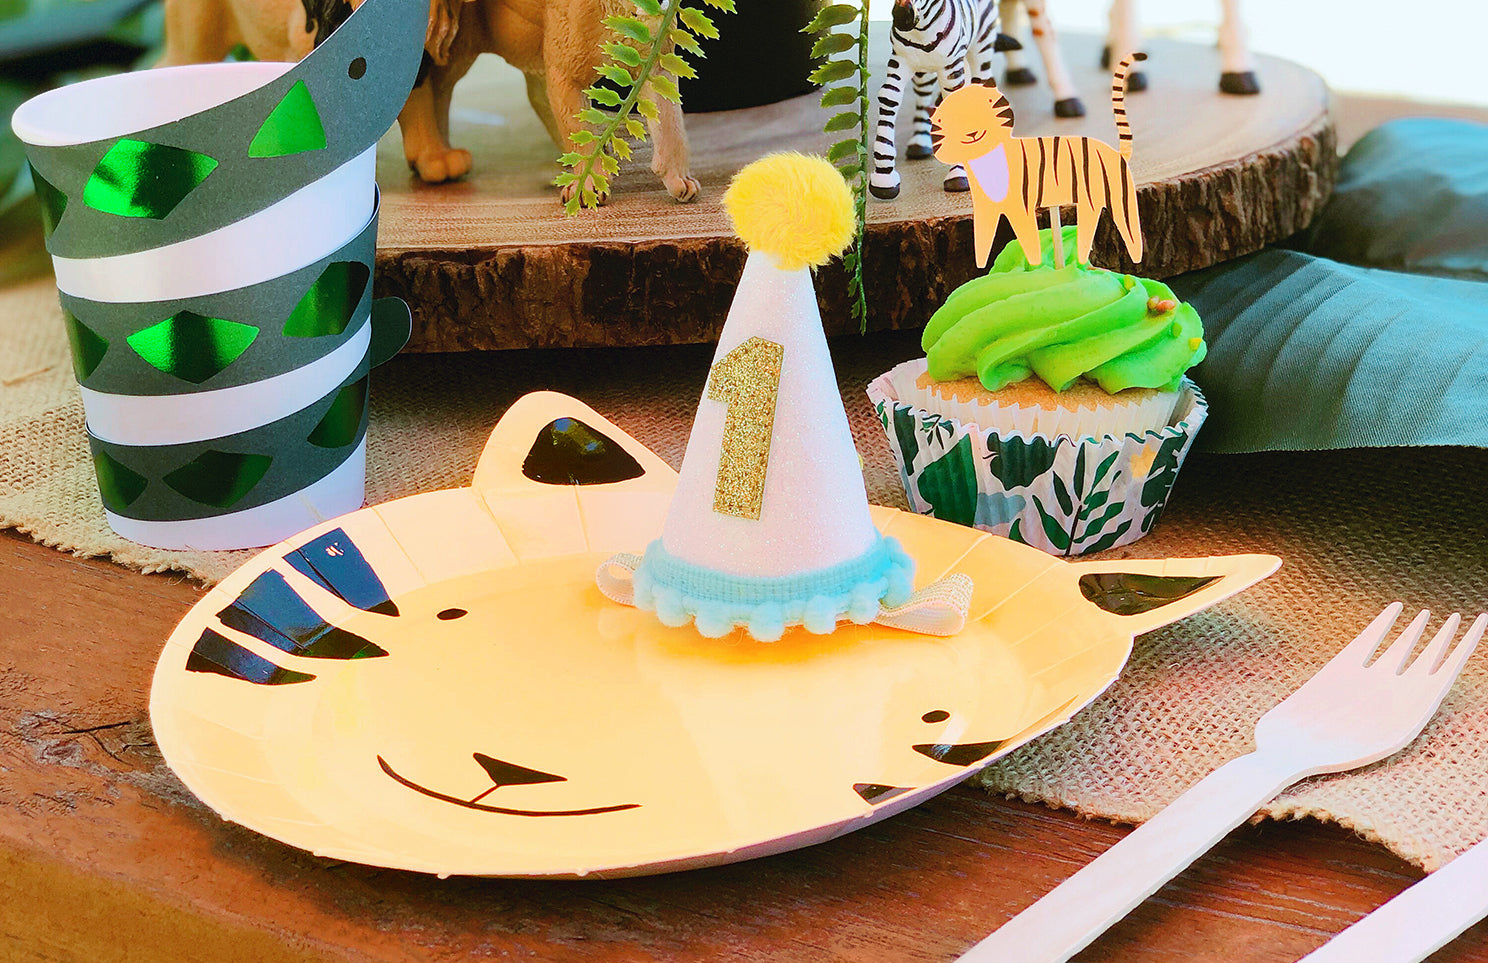 A fun kid's party table with animal themed party supplies including tiger shaped plates, snake wrapped paper party cups, a birthday hat with number 1 on it for a child's first birthday celebration